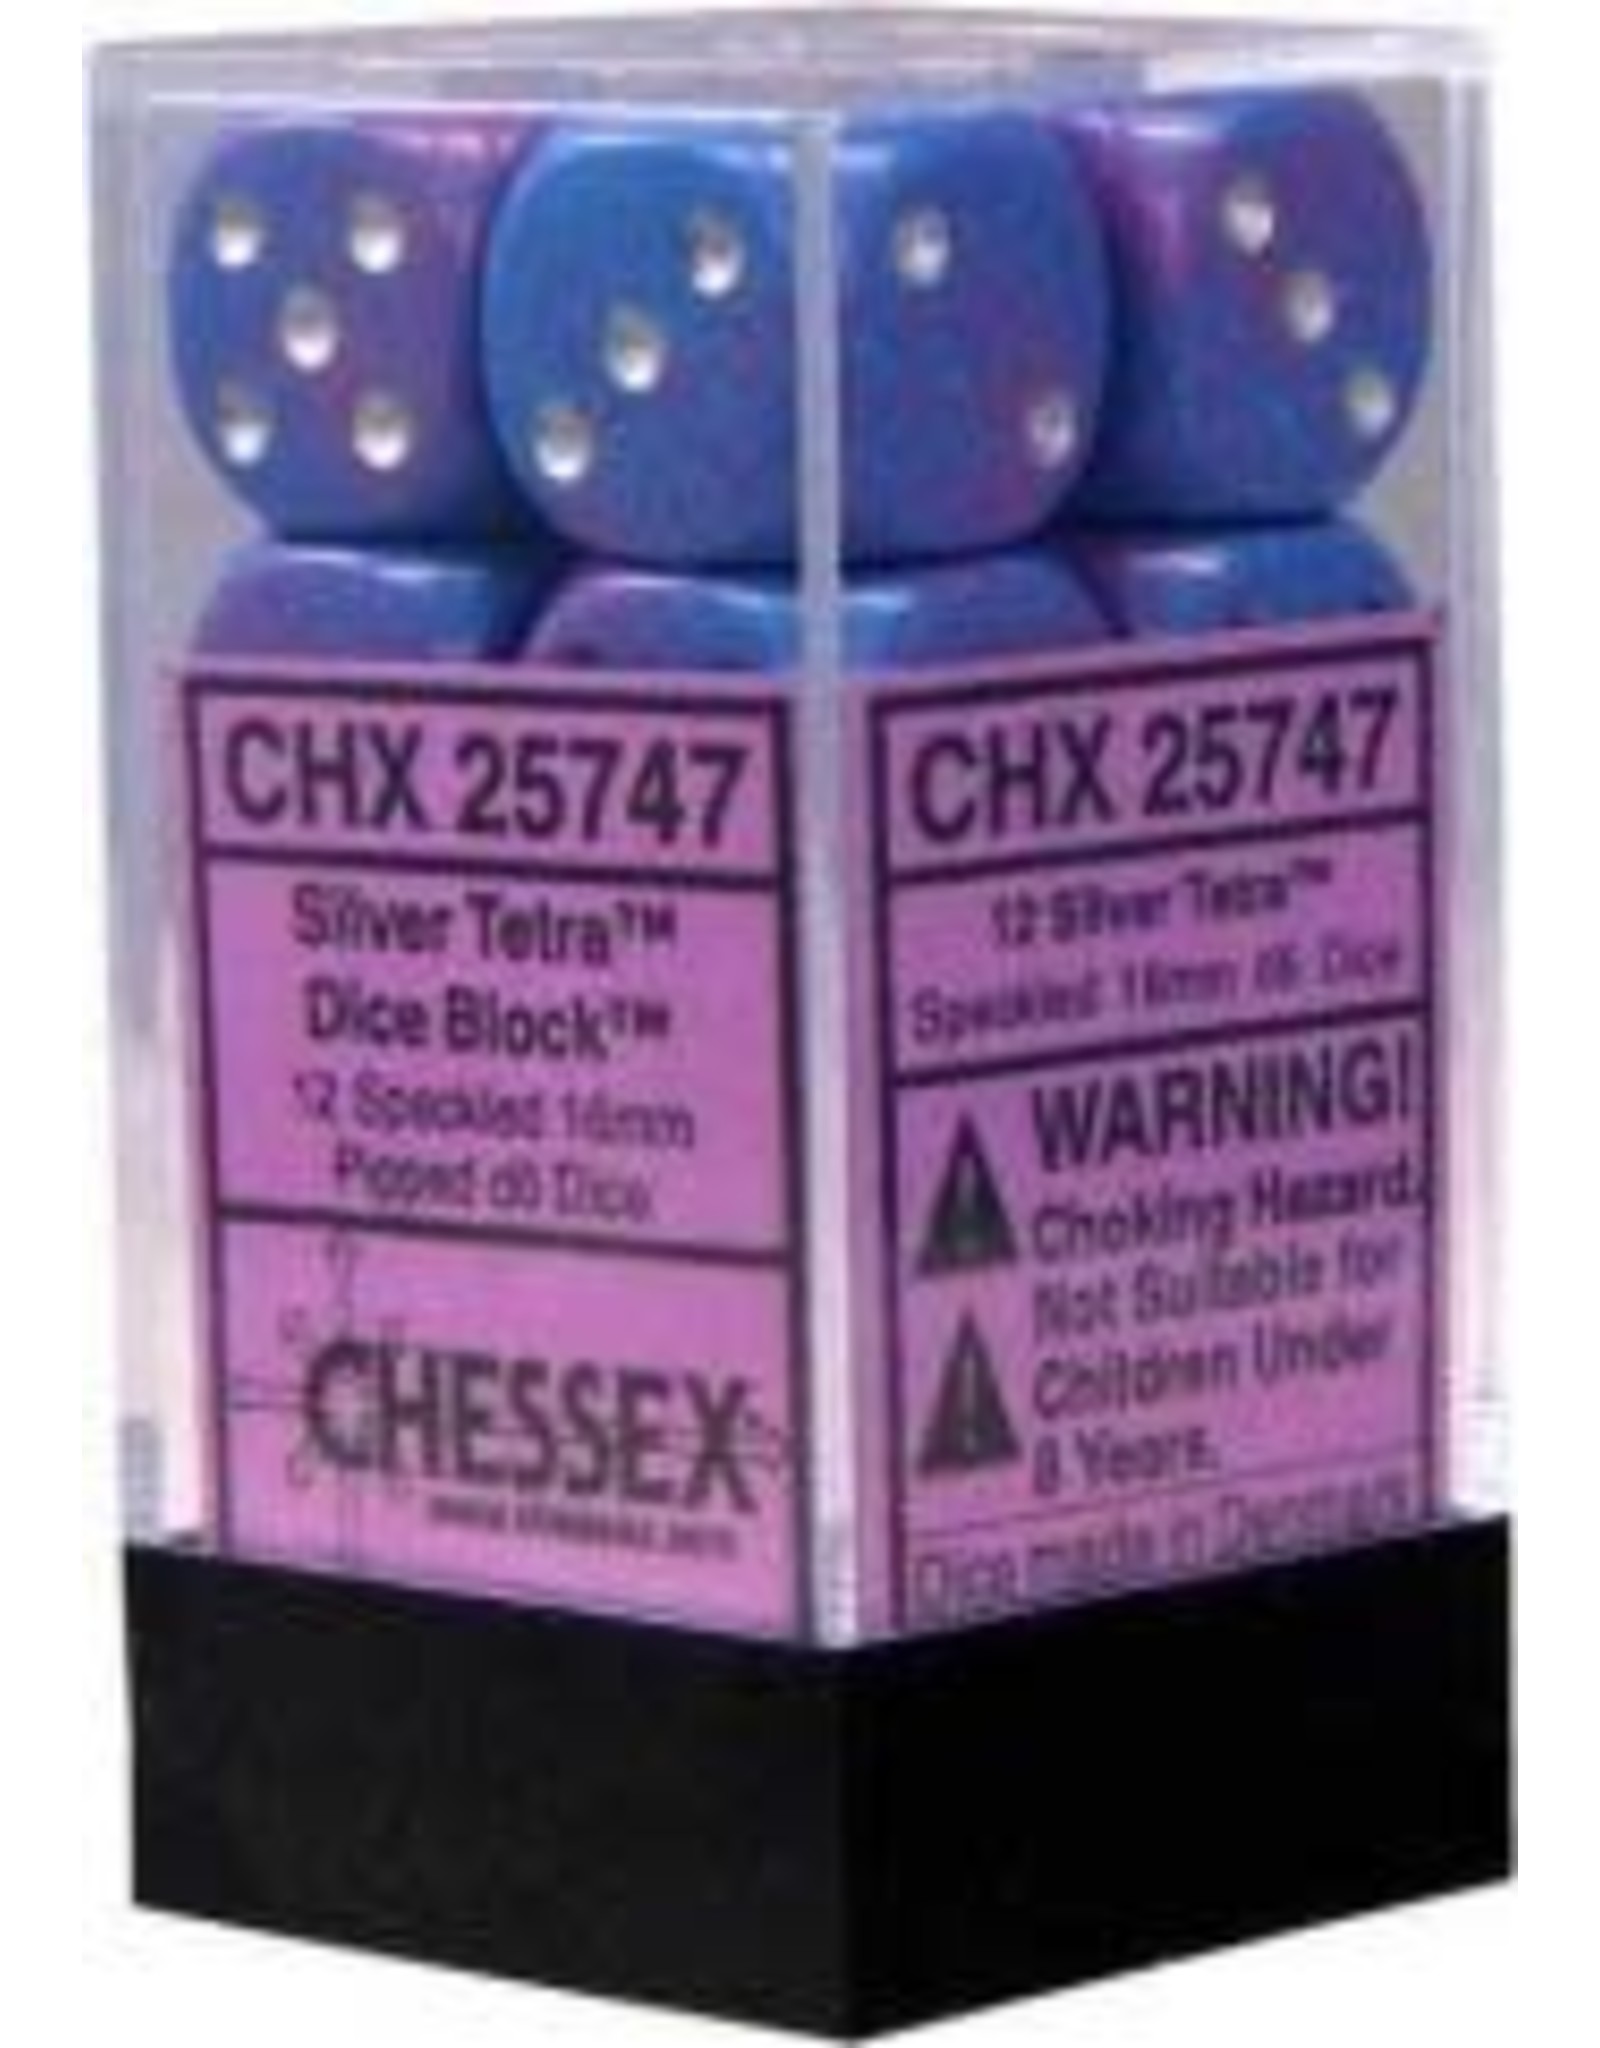 Chessex Speckled Silver Tetra 16mm D6 Dice Block 12